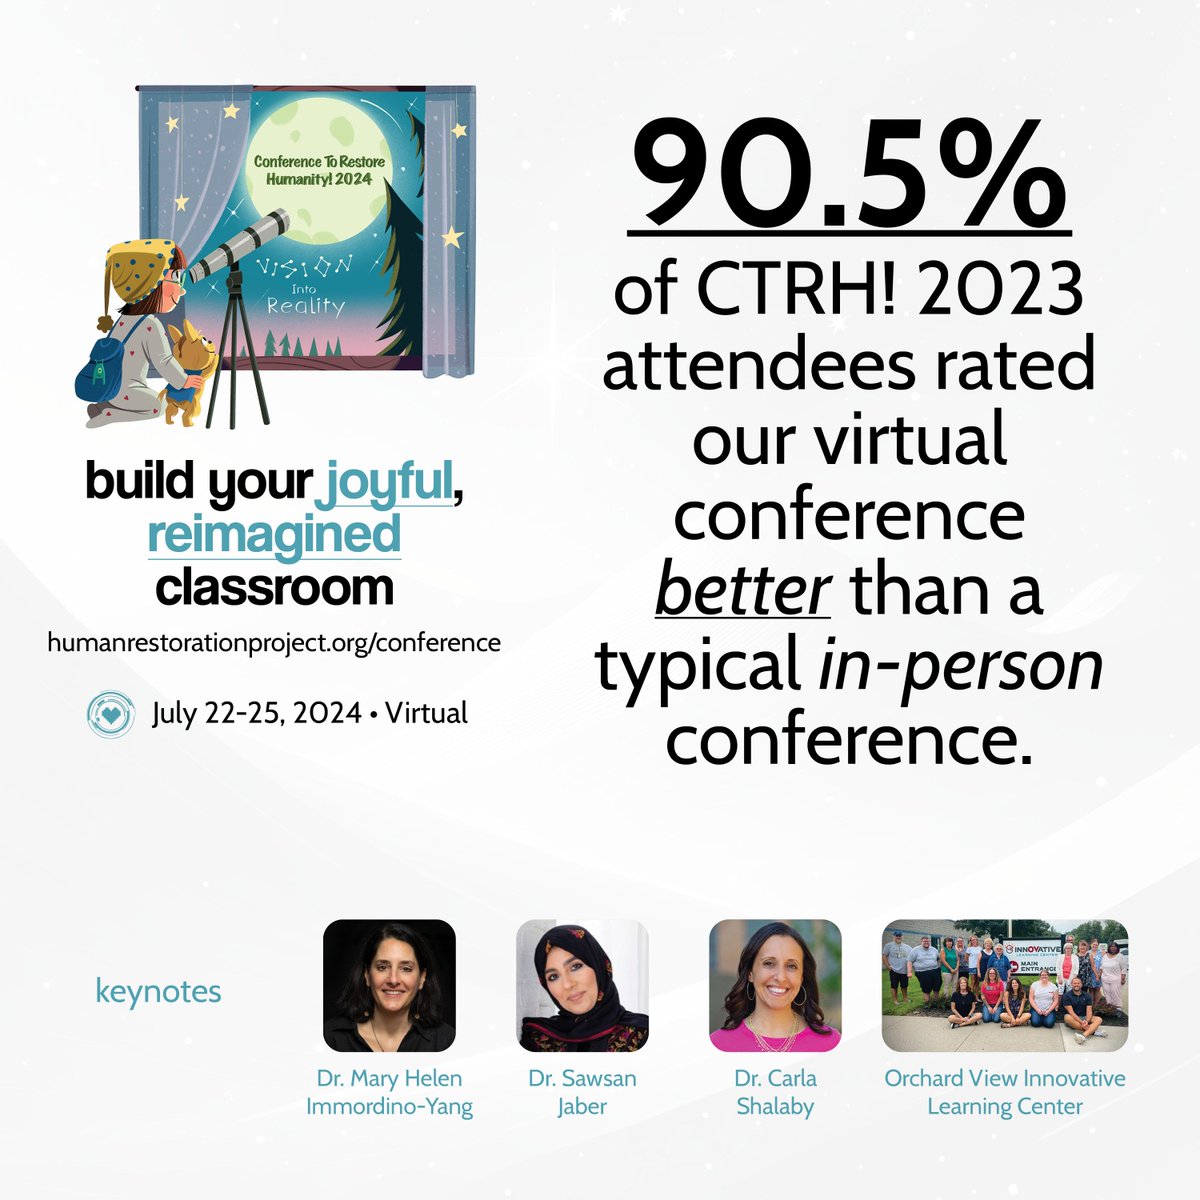 90.5% of #CTRH2023 attendees rated our virtual conference *better* than a typical in-person conference! Learn more & register for #CTRH2024 @ secure.givelively.org/event/human-re…